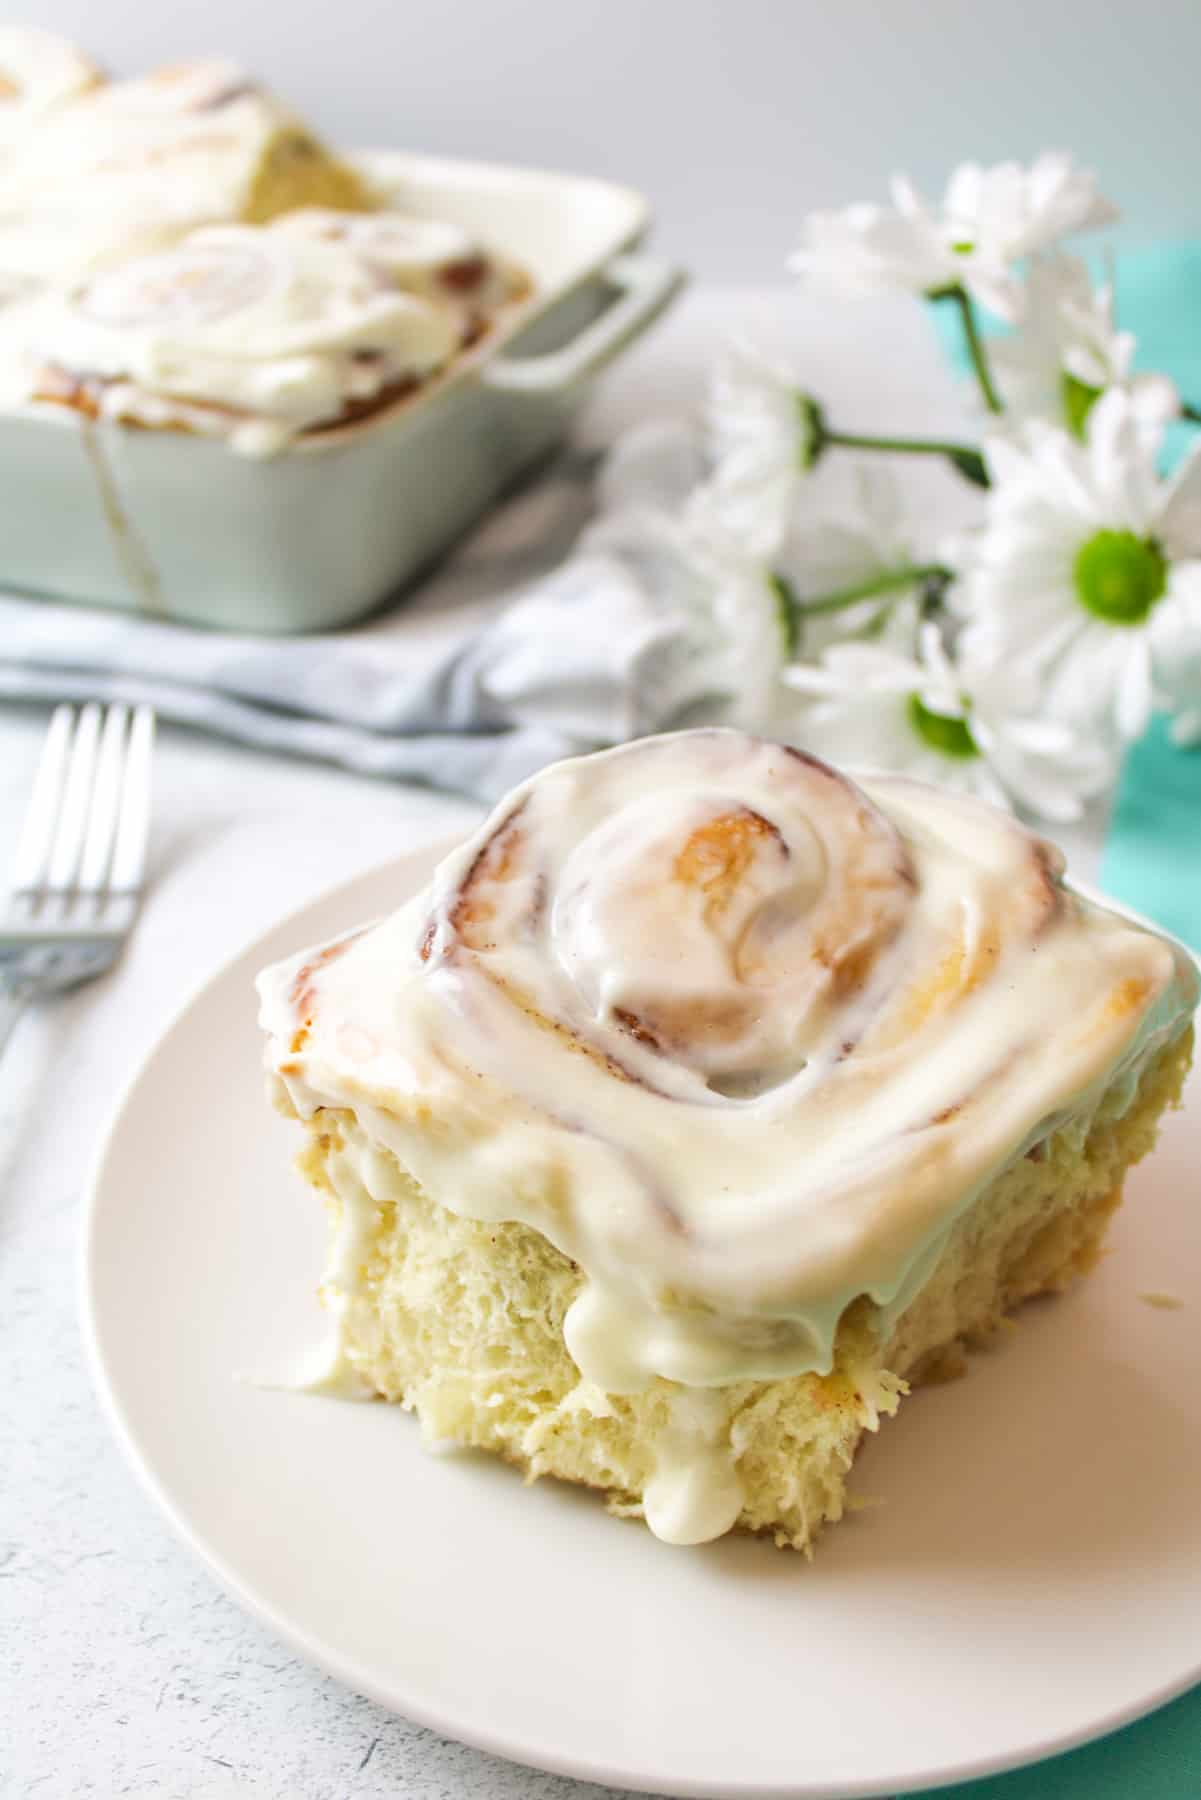 a frosted cinnamon roll on a plate with more rolls in background near fresh flowers and a fork